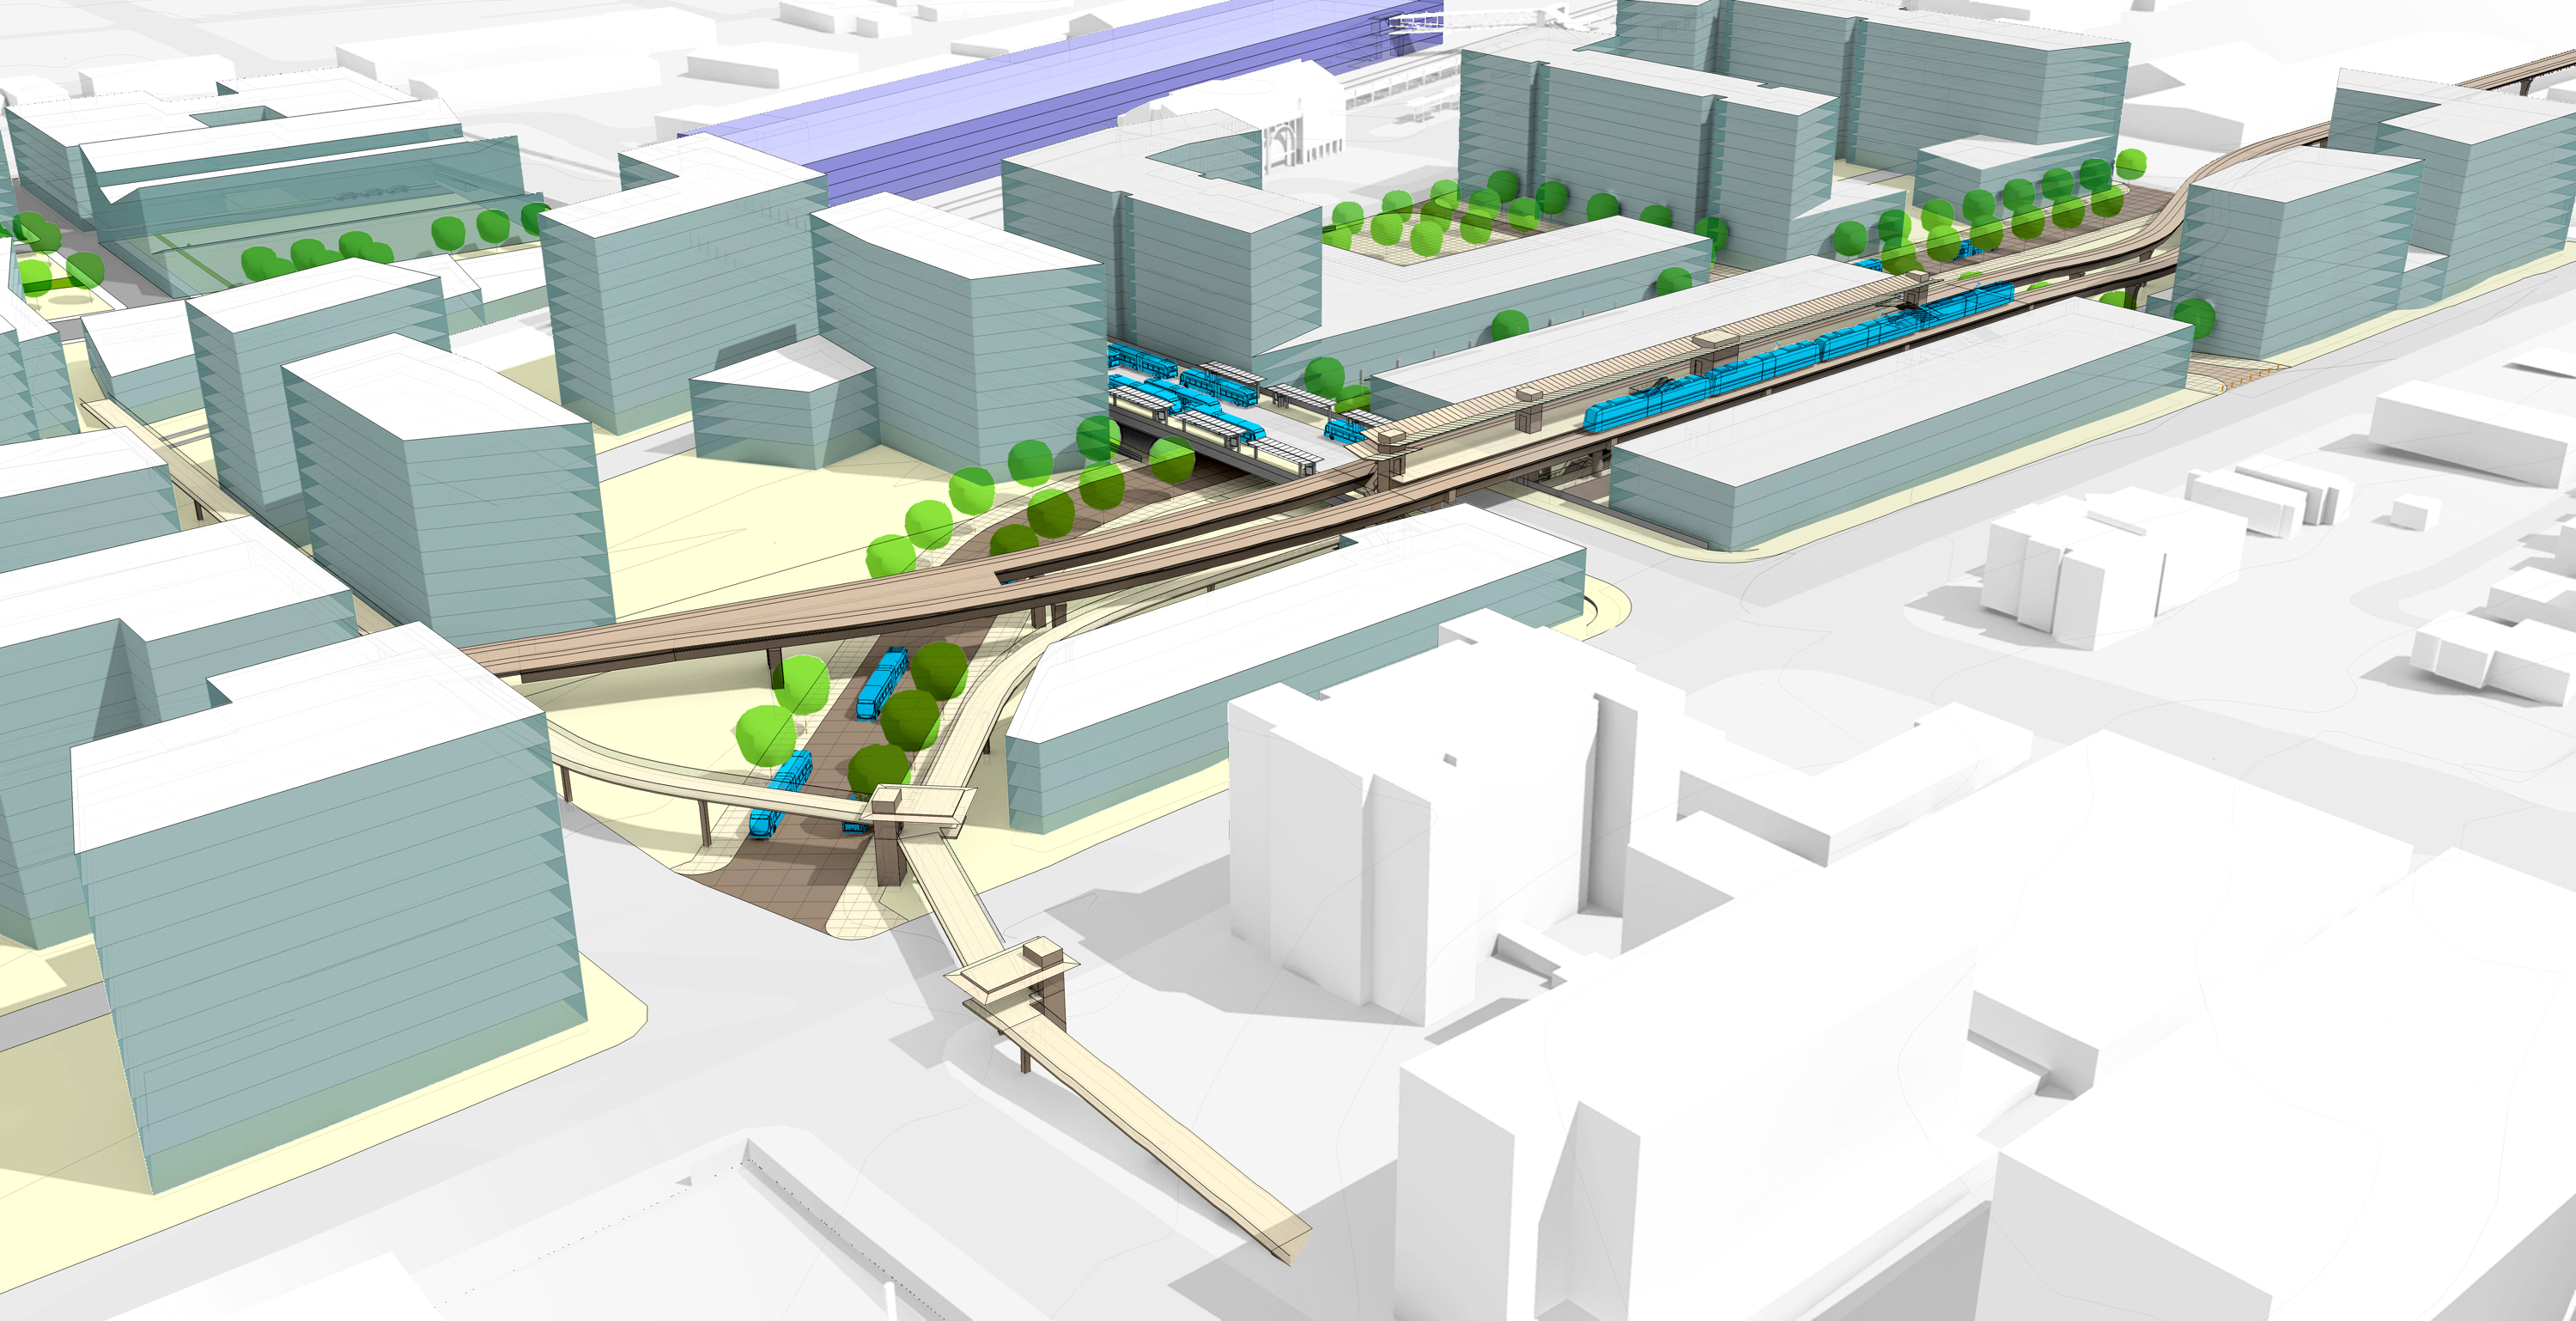 Concept for a Broadway light rail station, busway, and mixed-mode bridge. (City of Everett)